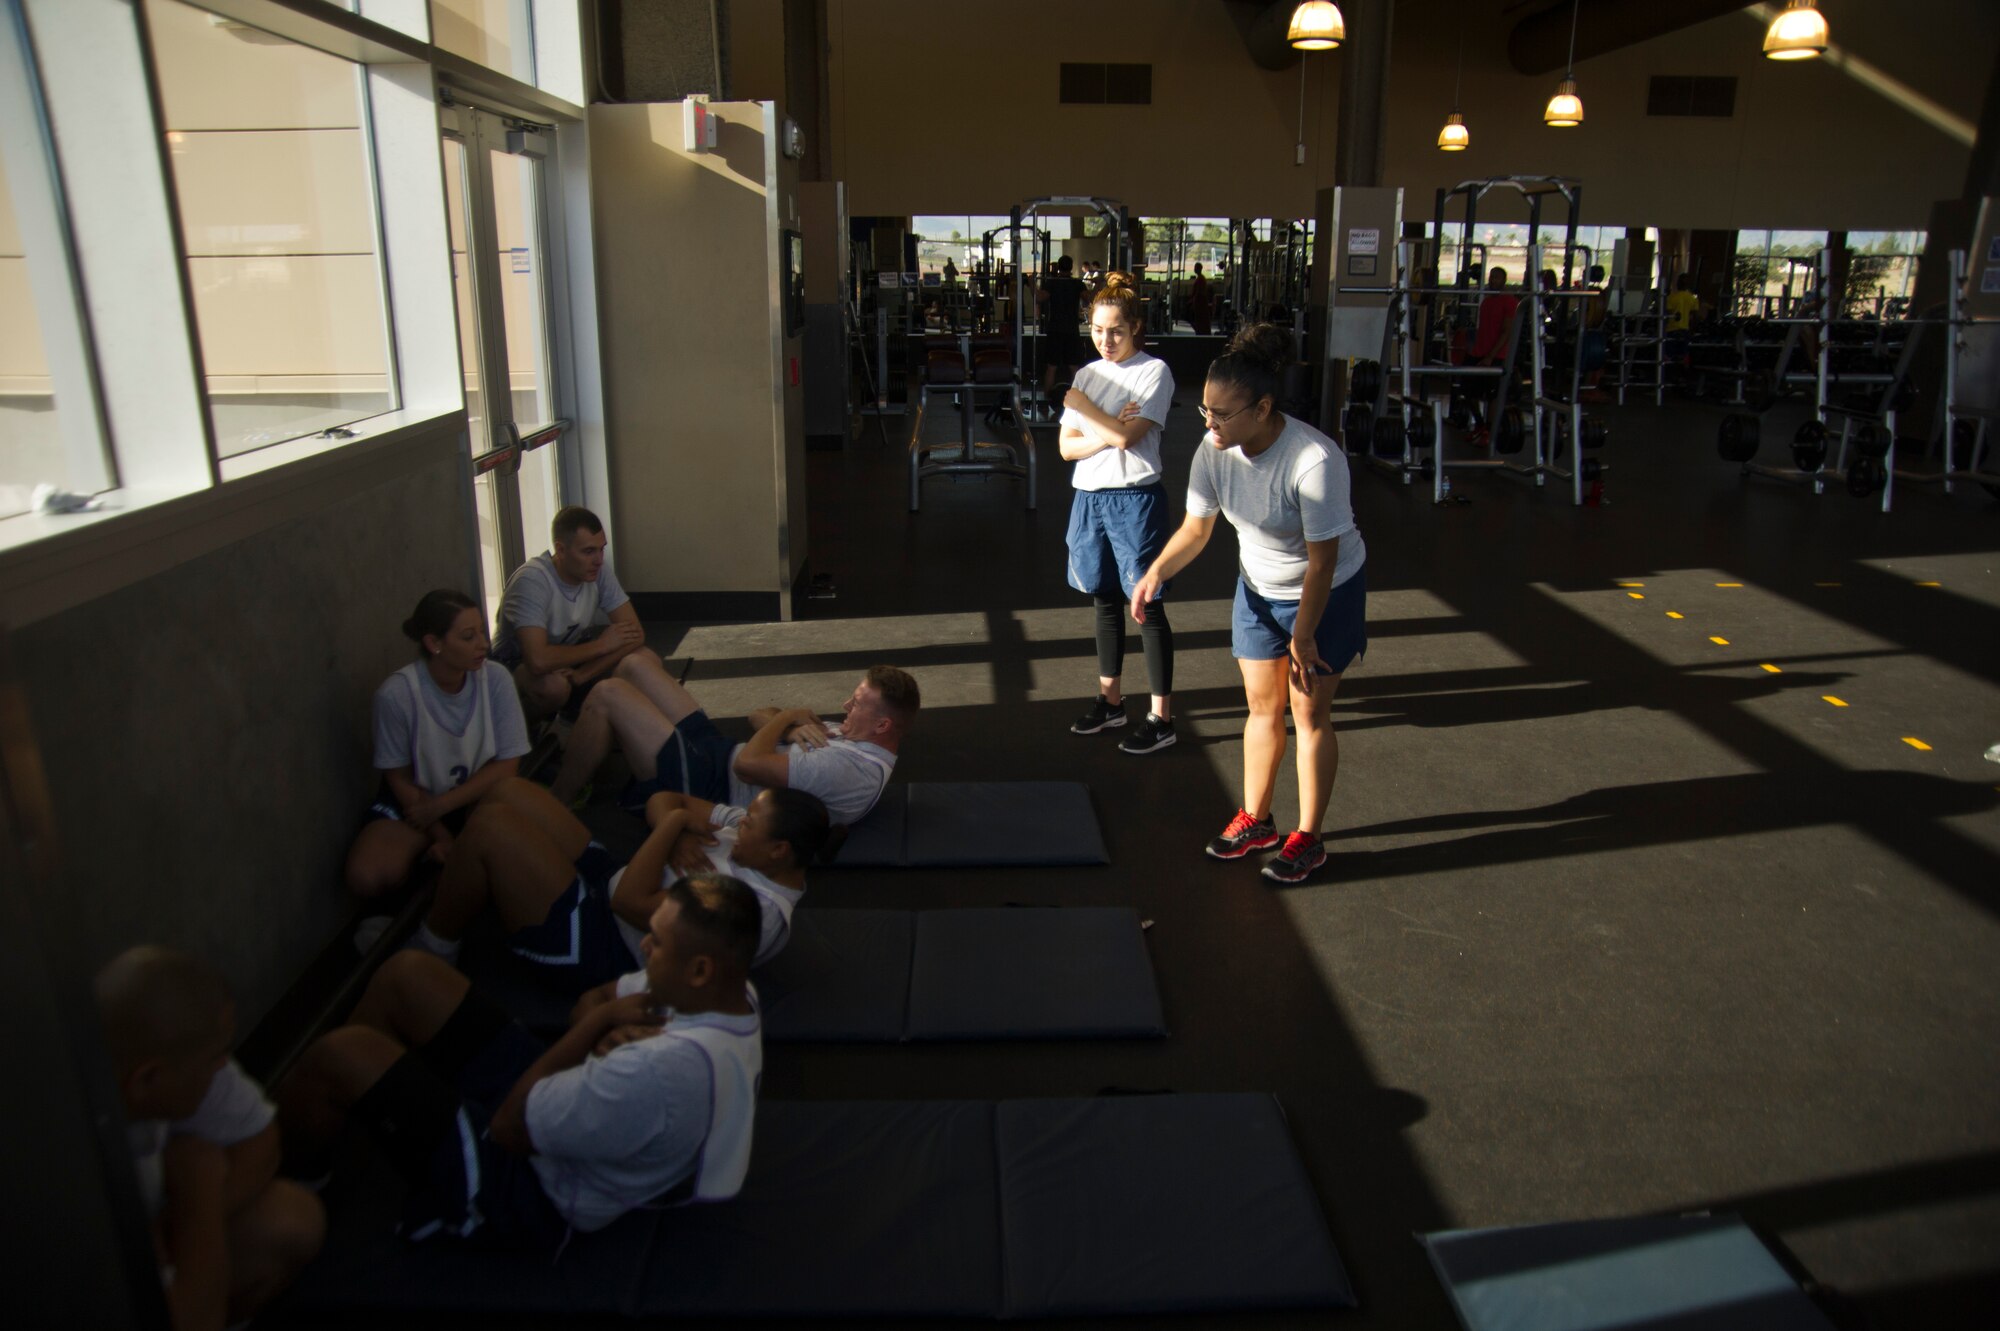 Staff Sgt. Deanna Sanchez, 926th Force Support Squadron Fitness Assessment Cell NCOIC, corrects the form of 926th Wing members performing the sit-ups portion of their physical fitness test July 9, 2016 at the Warrior Fitness Center. The 926th FSS supports the fitness testing of 926th Wing members and provides specialized culinary training for  new services Airmen whose career focus is food services.